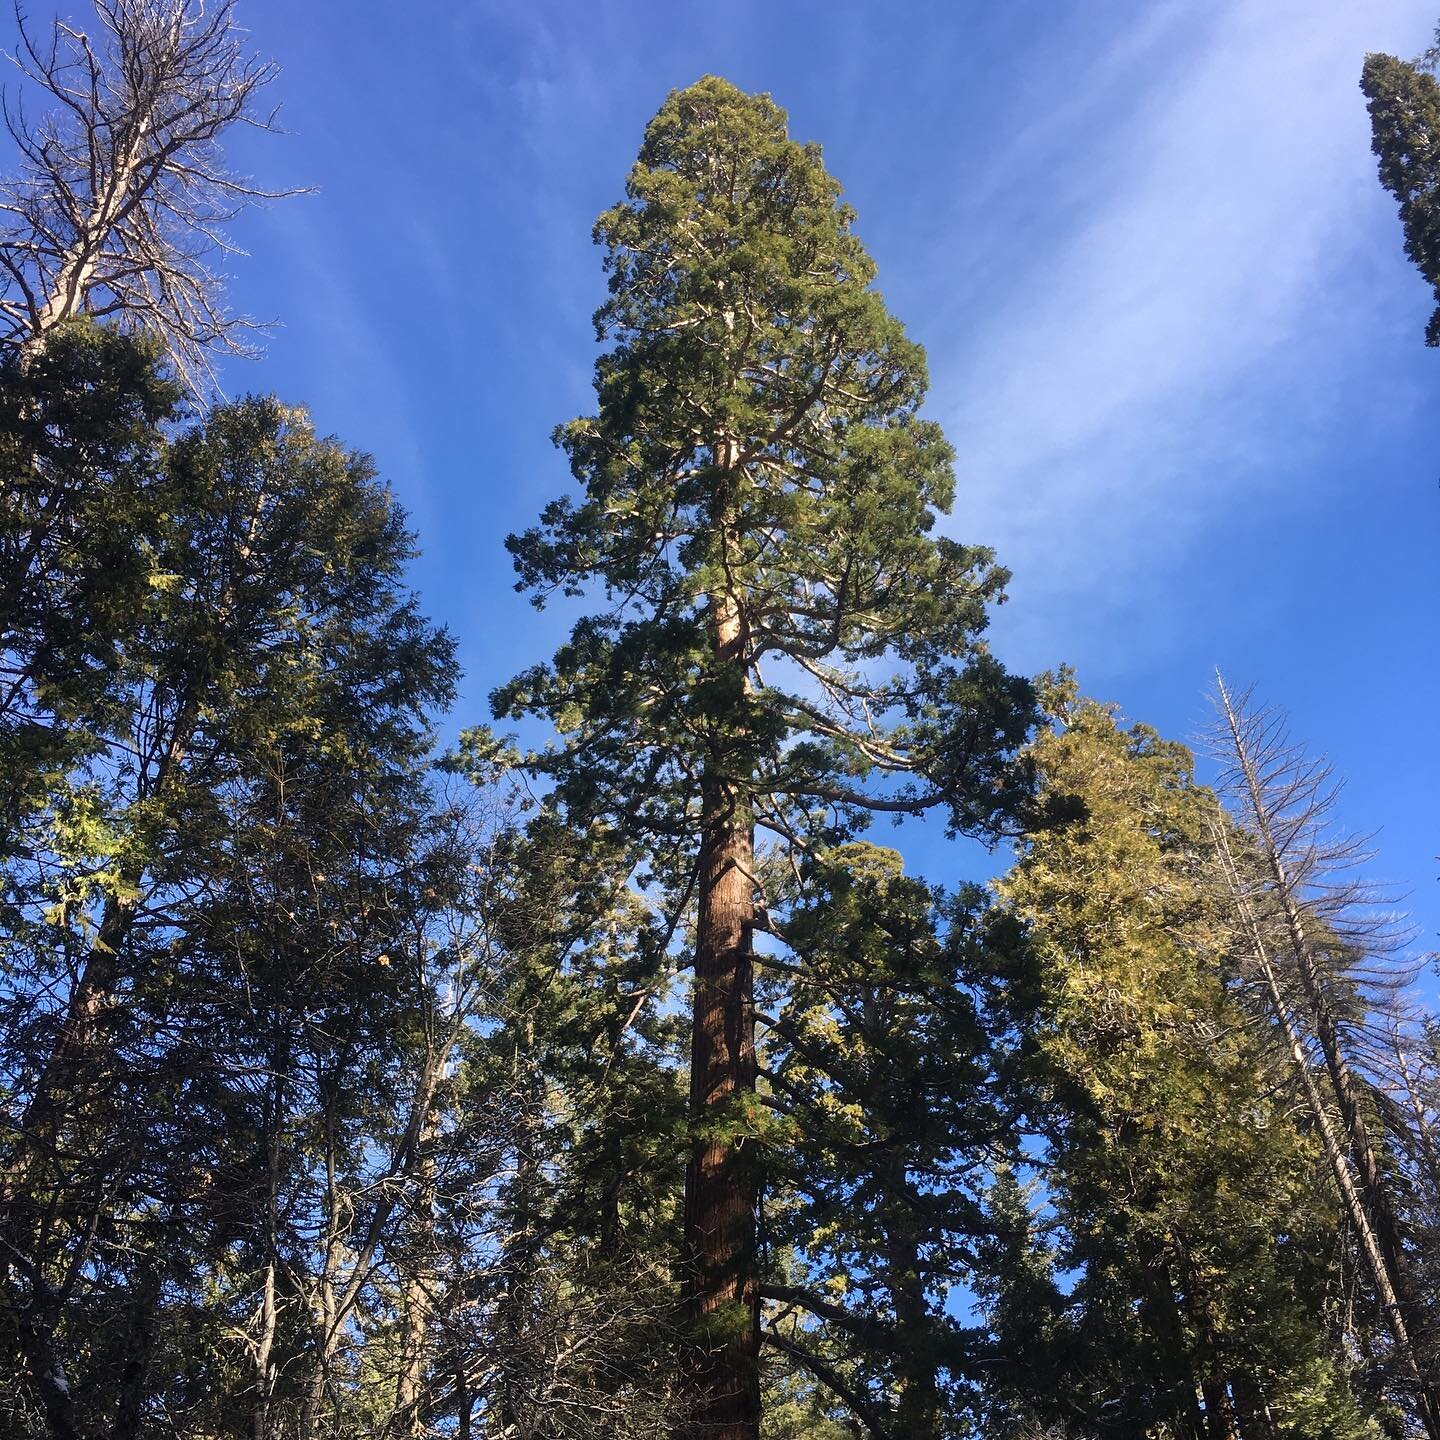 Then we saw some big trees that have been alive for thousands of years. Truly, what is time and what are sequoias. [Also, friends- a place to consider donating: @austinmutualaid ]  December 31, 2020